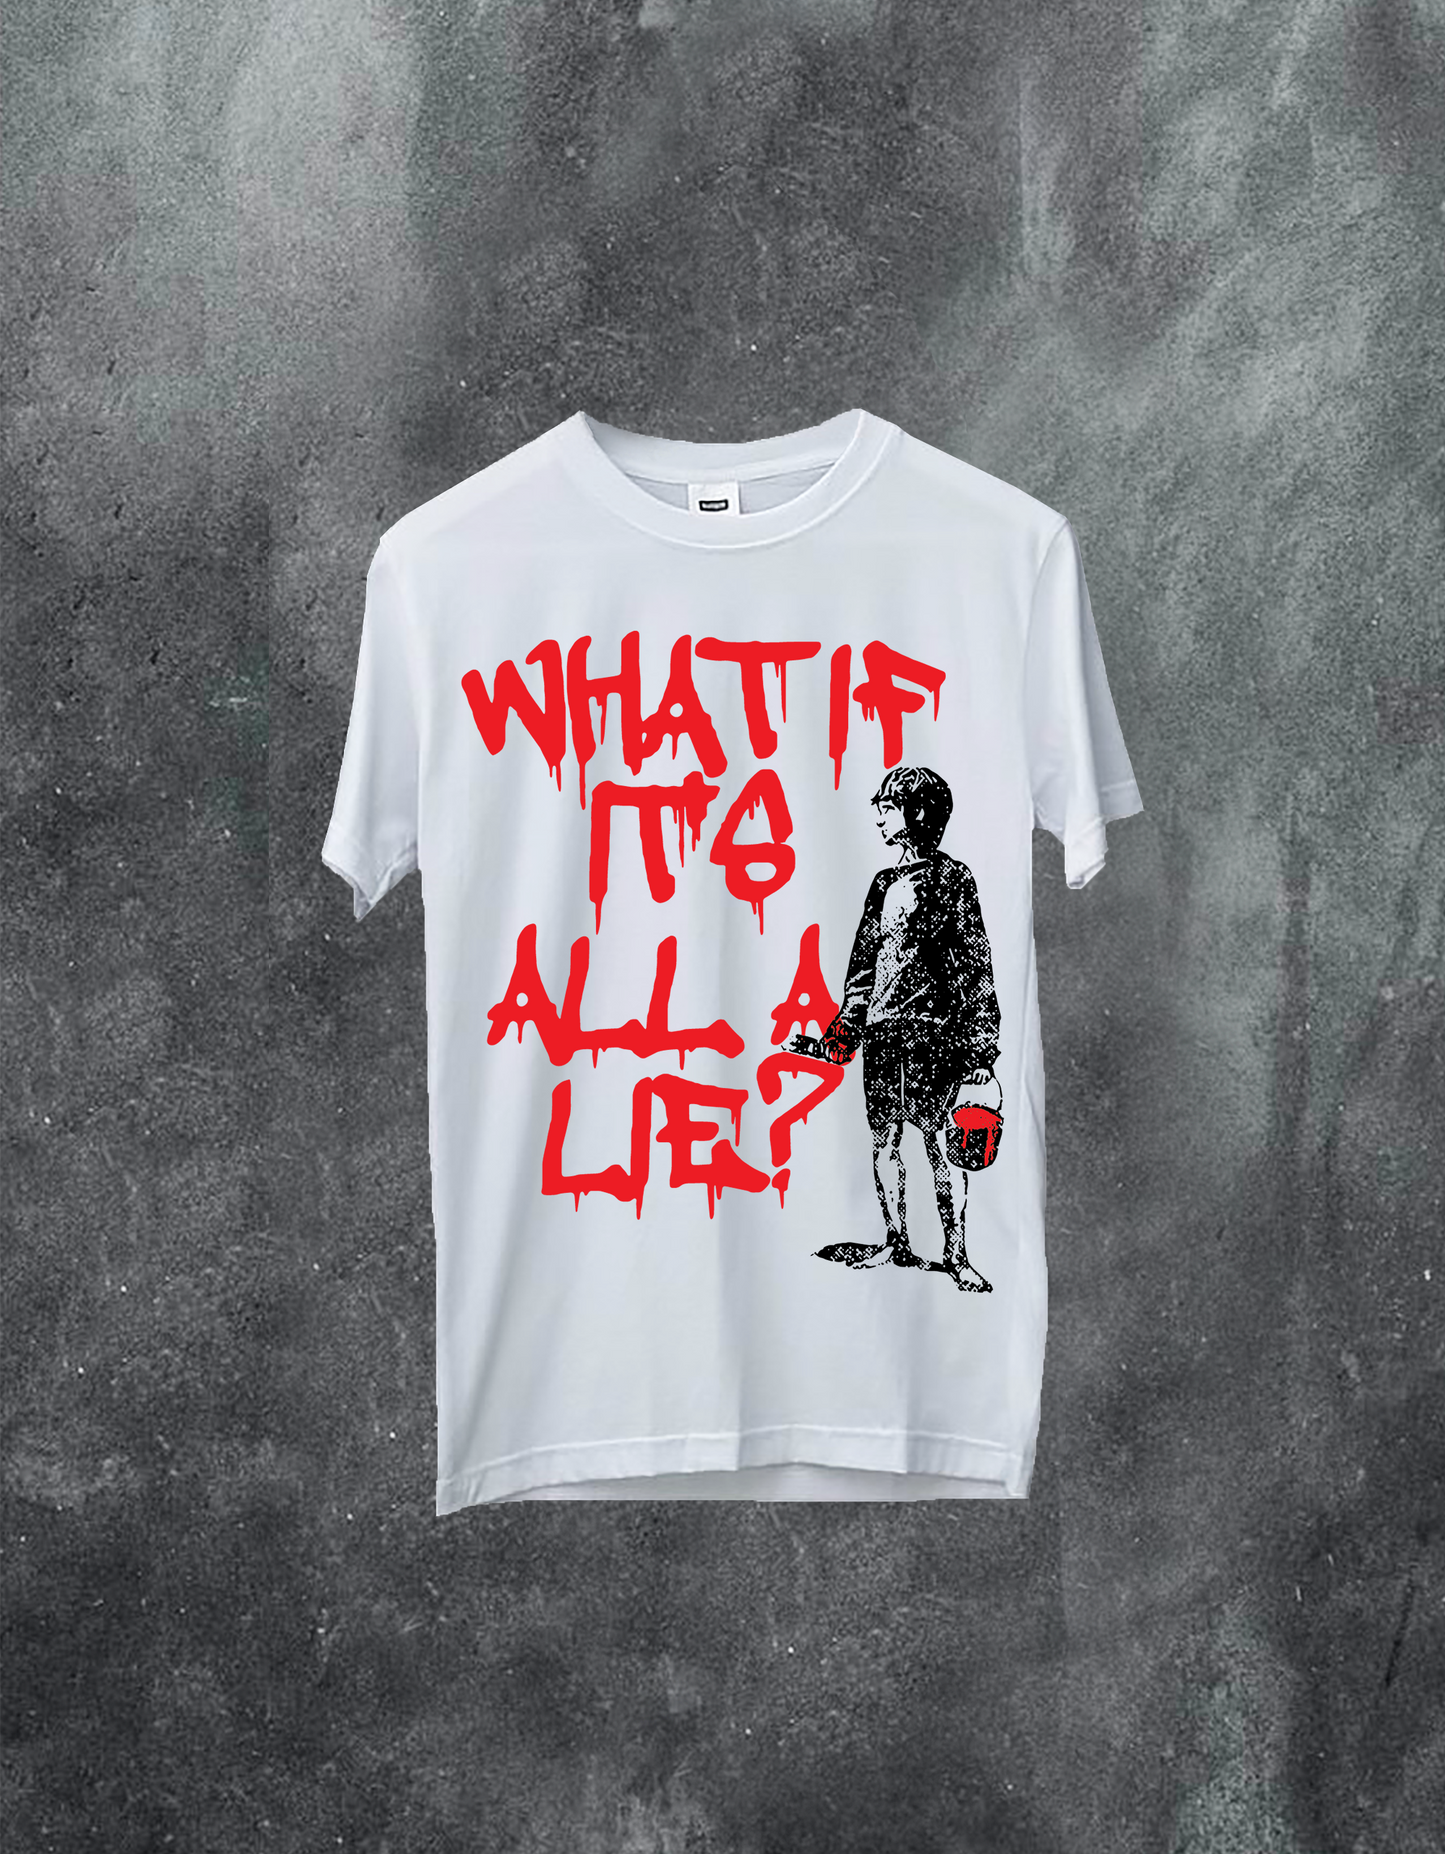 WHAT IF IT'S All A LIE Tee